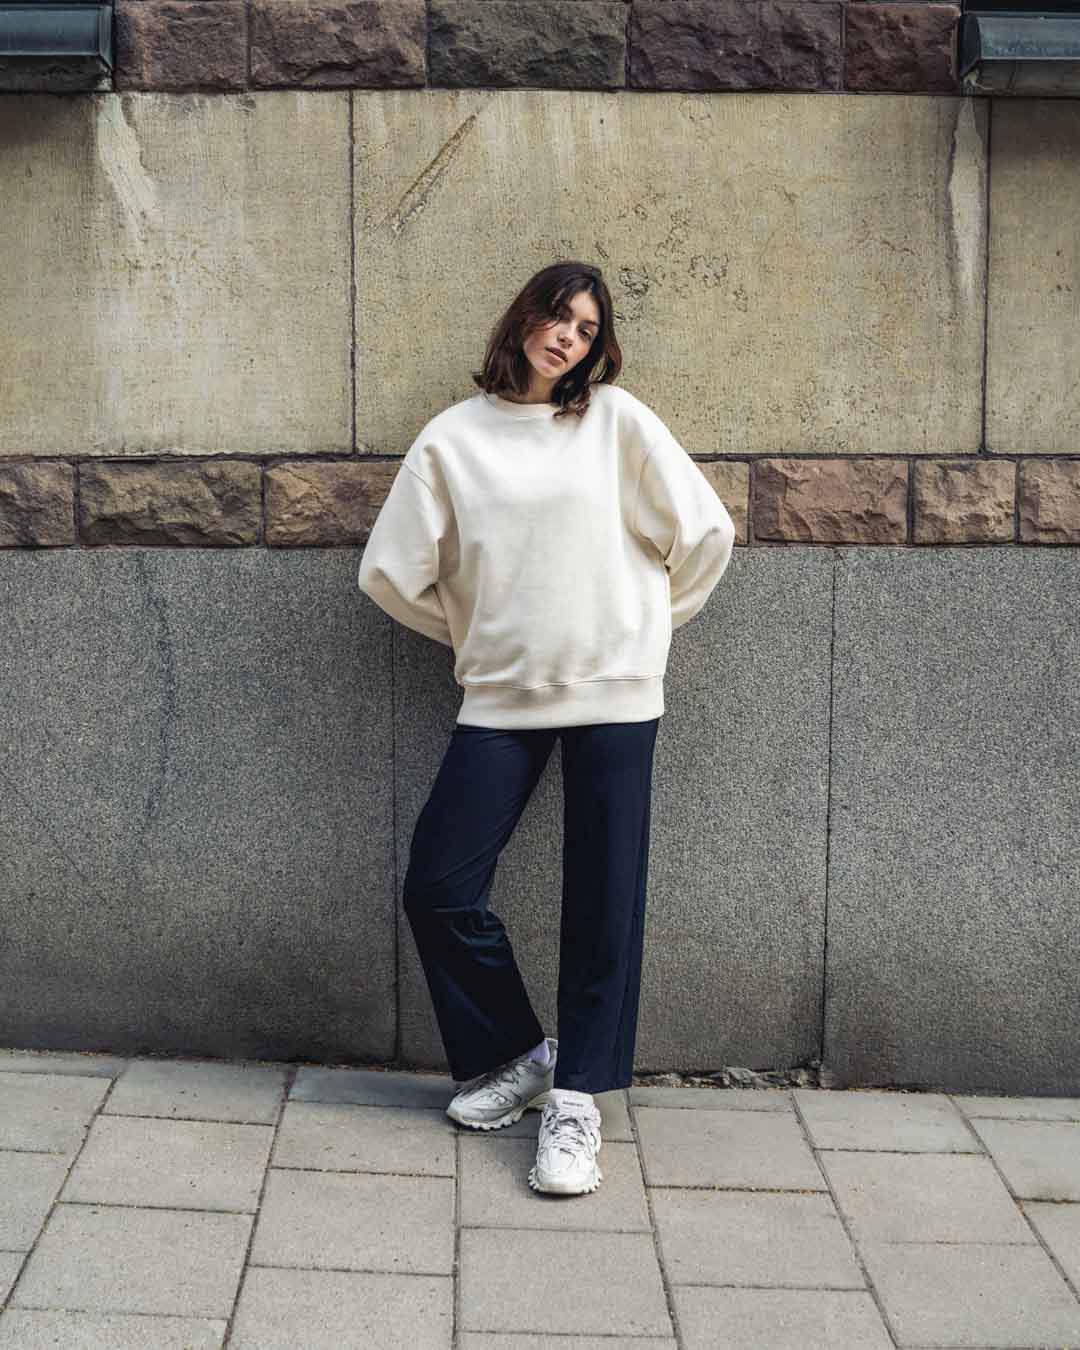 Woman in straight pants and over-sized cream sweatshirt leaning against a stone wall